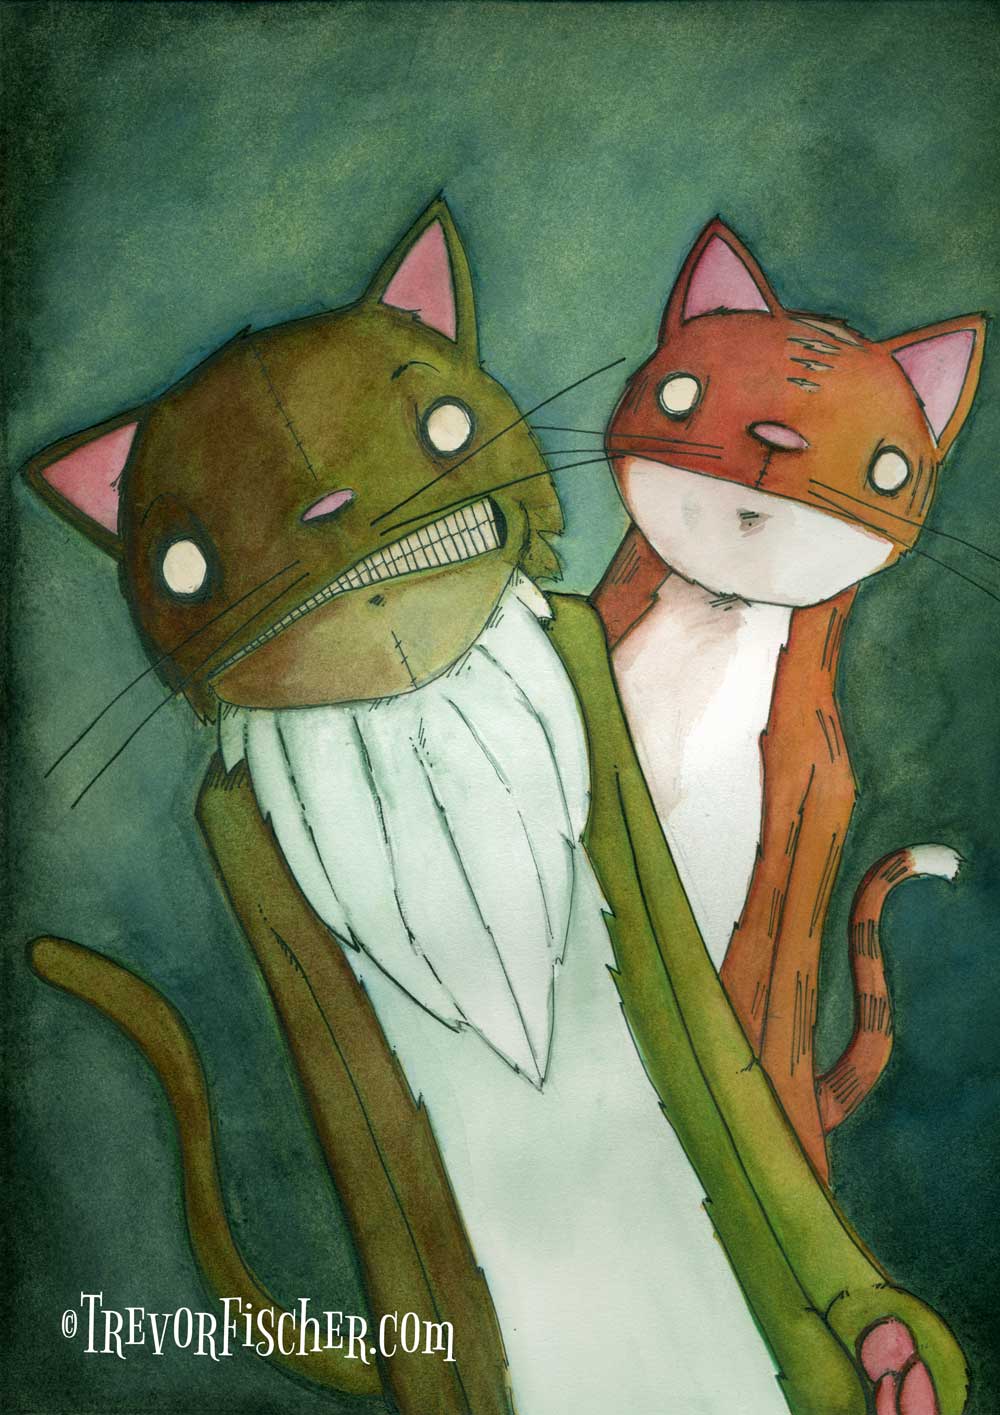 Water colour picture of cats in a goth sort of style